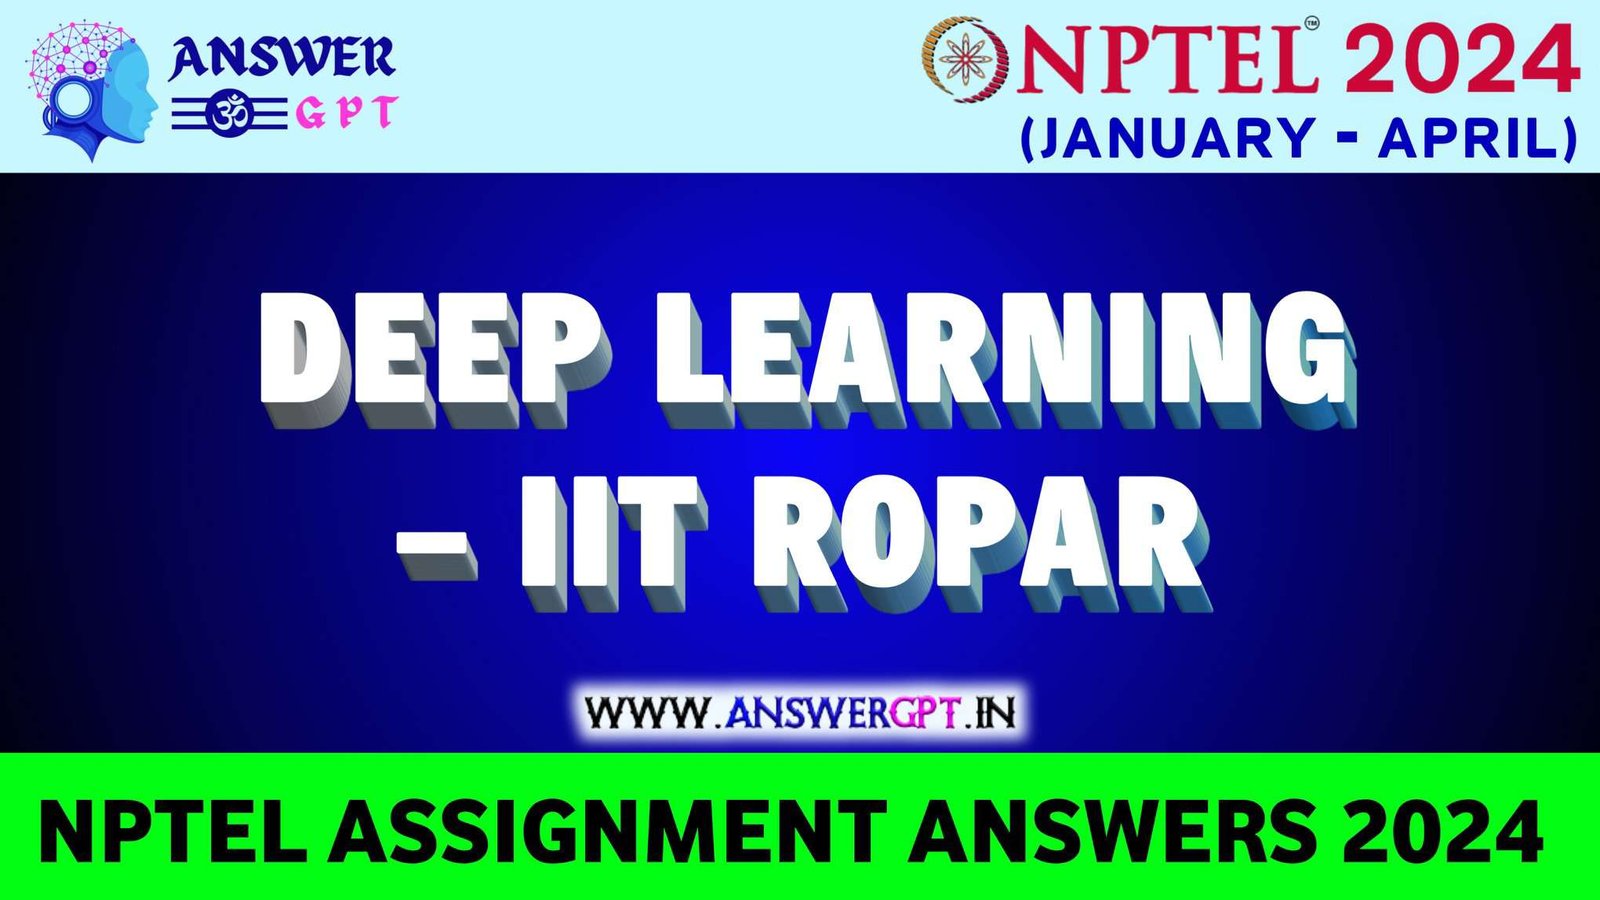 nptel deep learning iit ropar assignment answers week 1